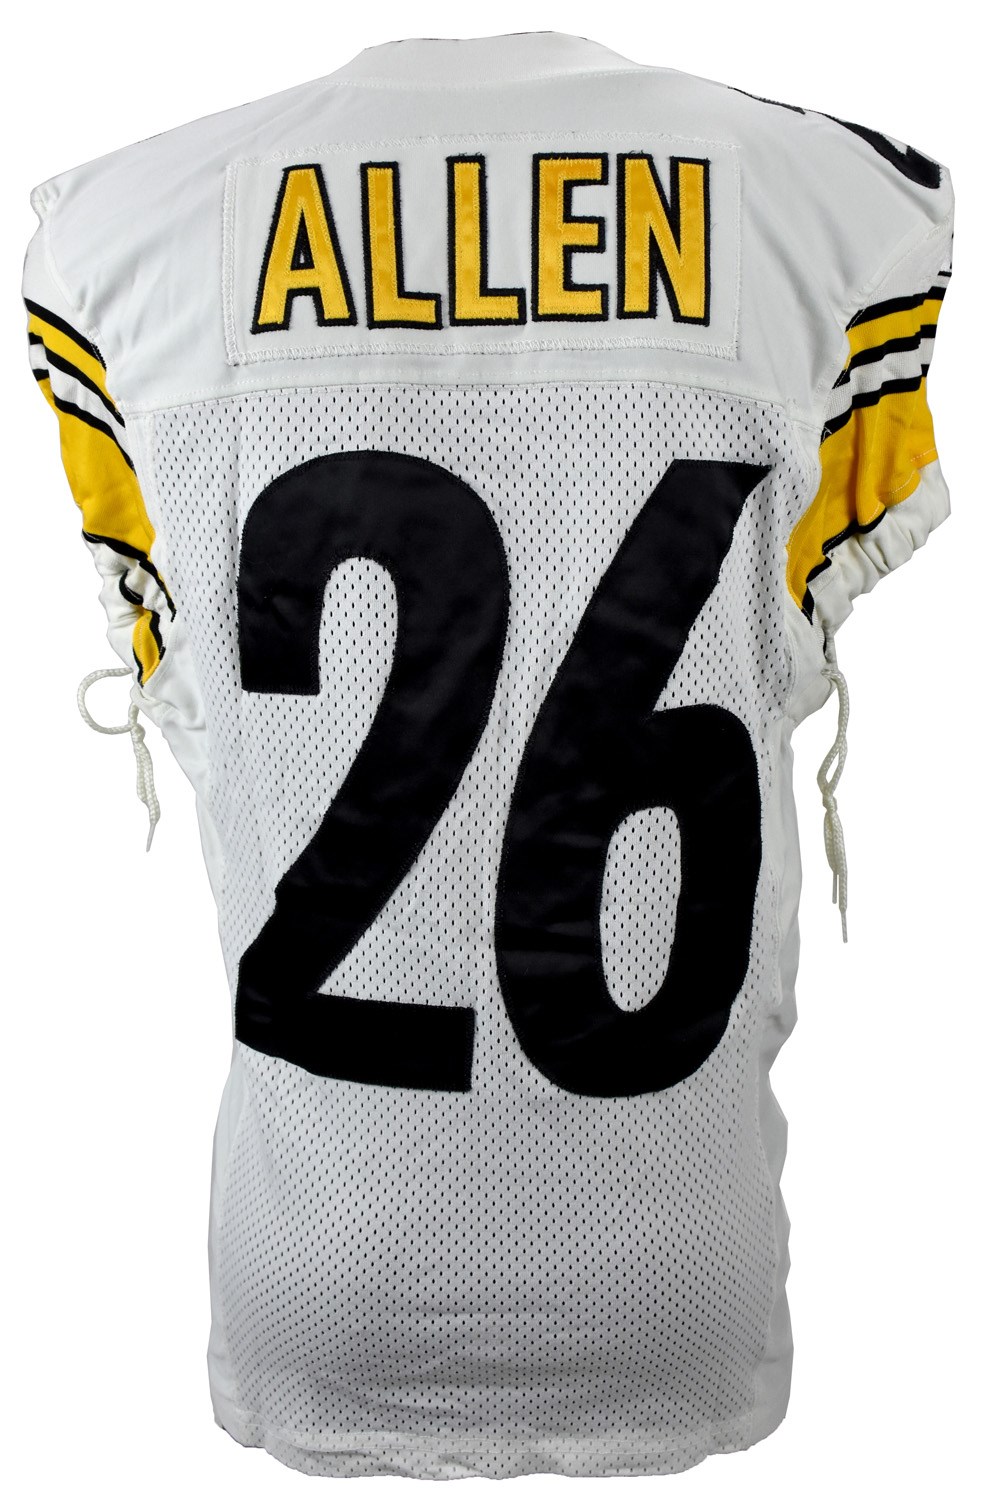 - 2011 Season Will Allen Pittsburgh Steelers AFC Wild Card Game Worn Jersey (Photo-Matched, Resolution Photomatching LOA)